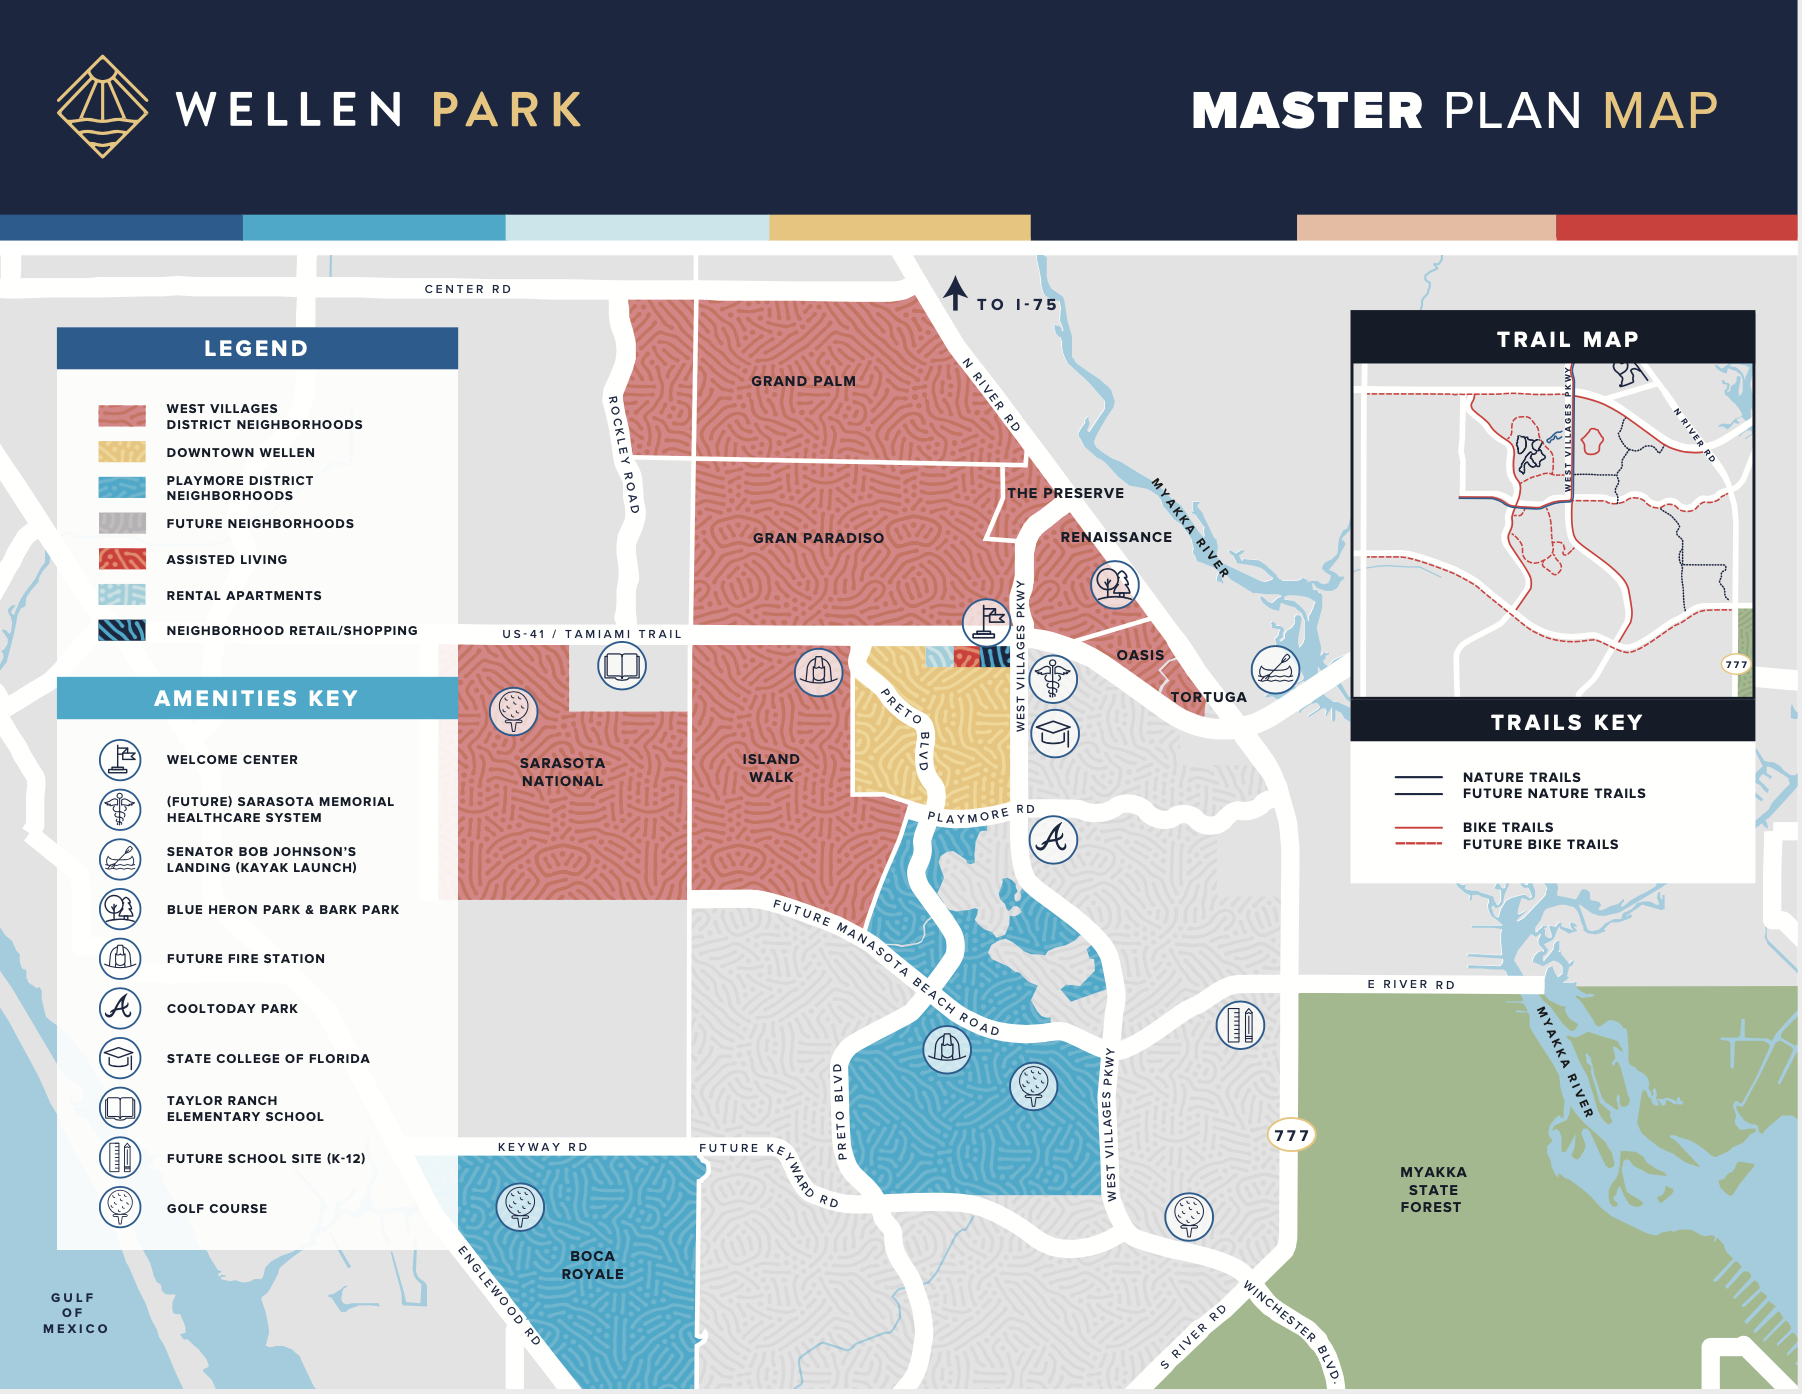 Wellen Park's new Playmore District features a range of neighborhood and  home options